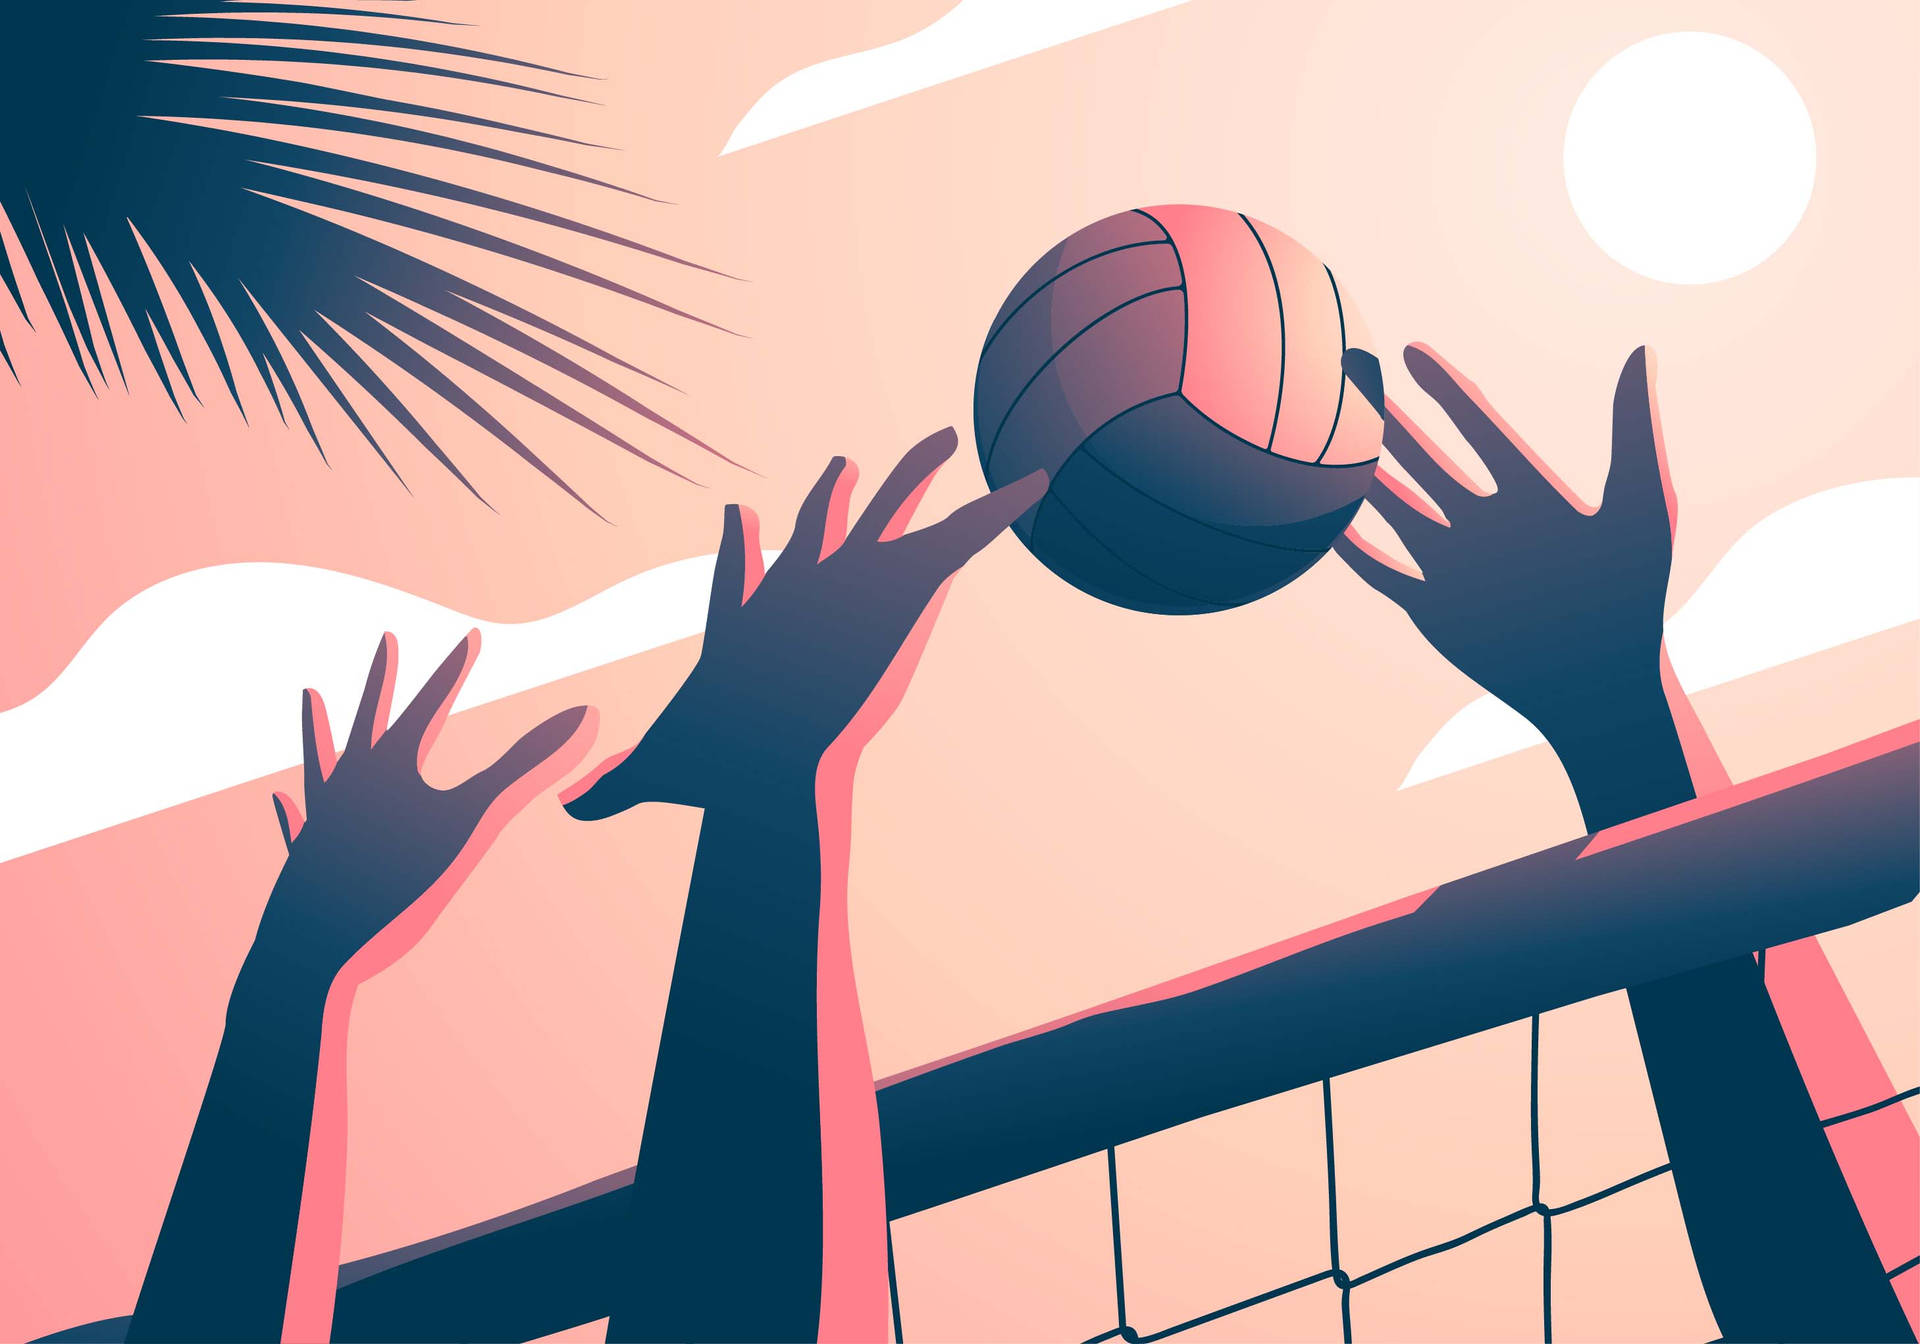 Free Volleyball Aesthetic Wallpaper Downloads, [100+] Volleyball Aesthetic  Wallpapers for FREE 